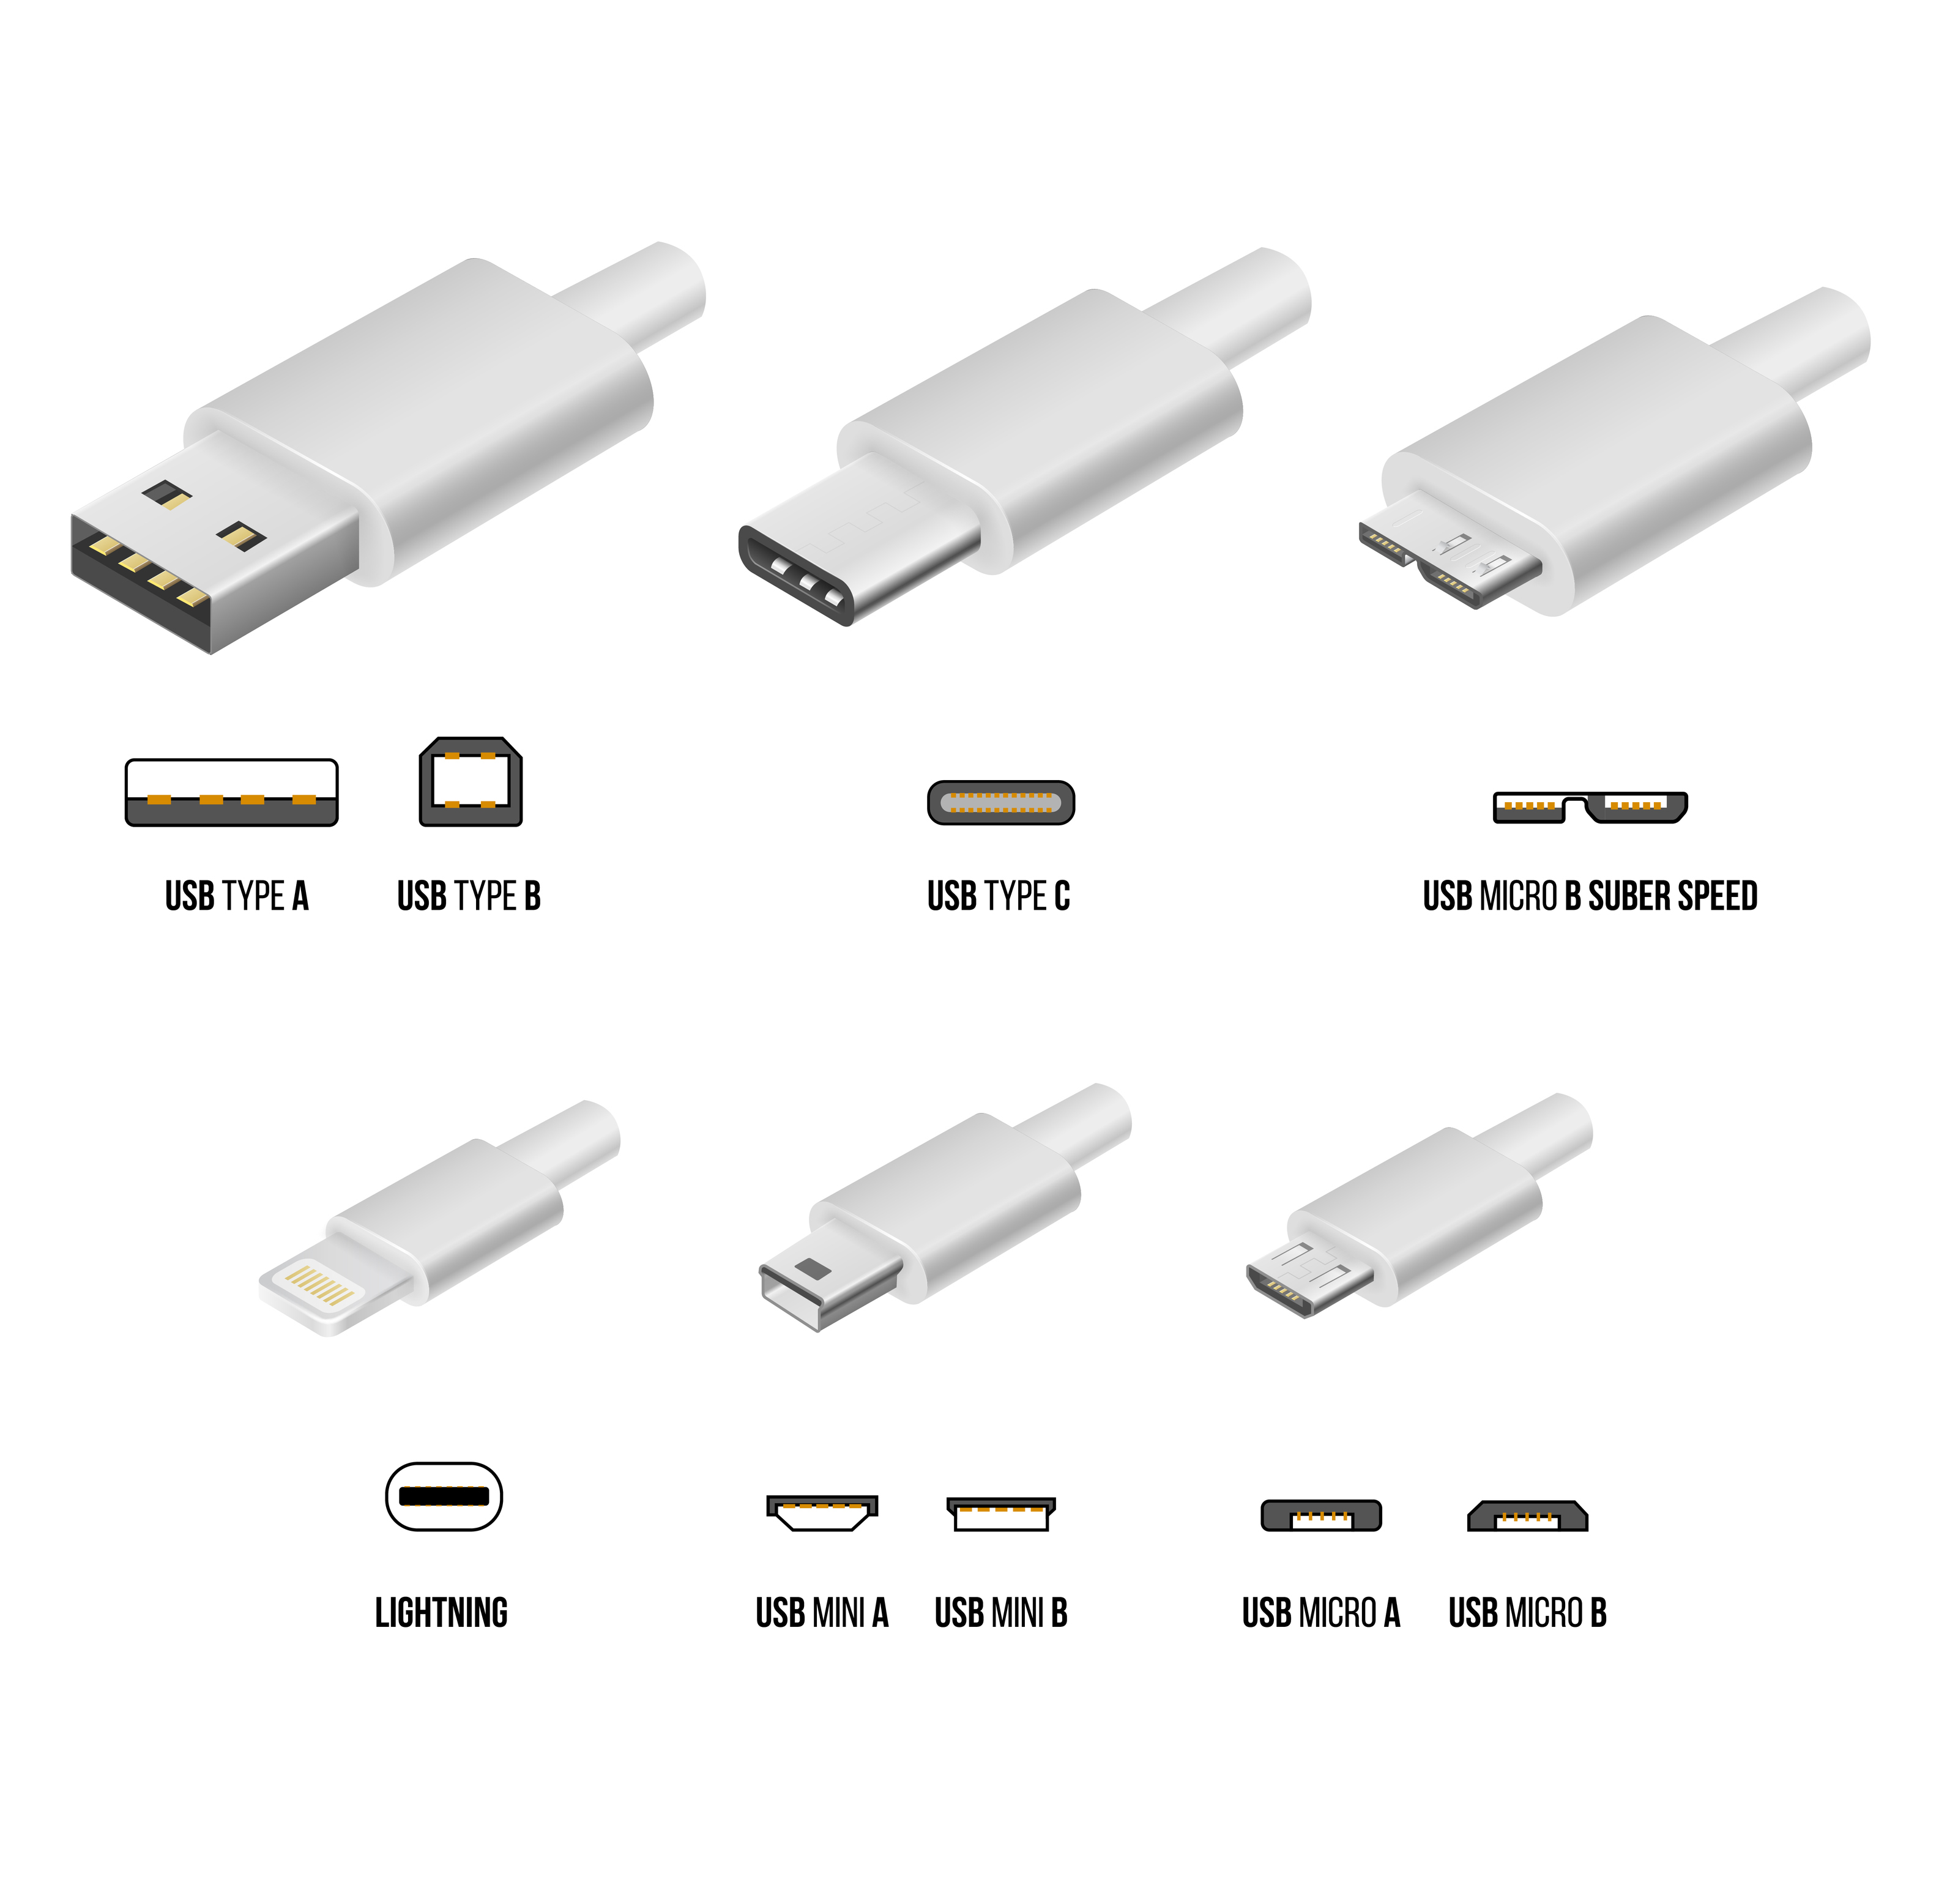 What Are The Different Types Of Usb Connectors With Pictures | Images ...